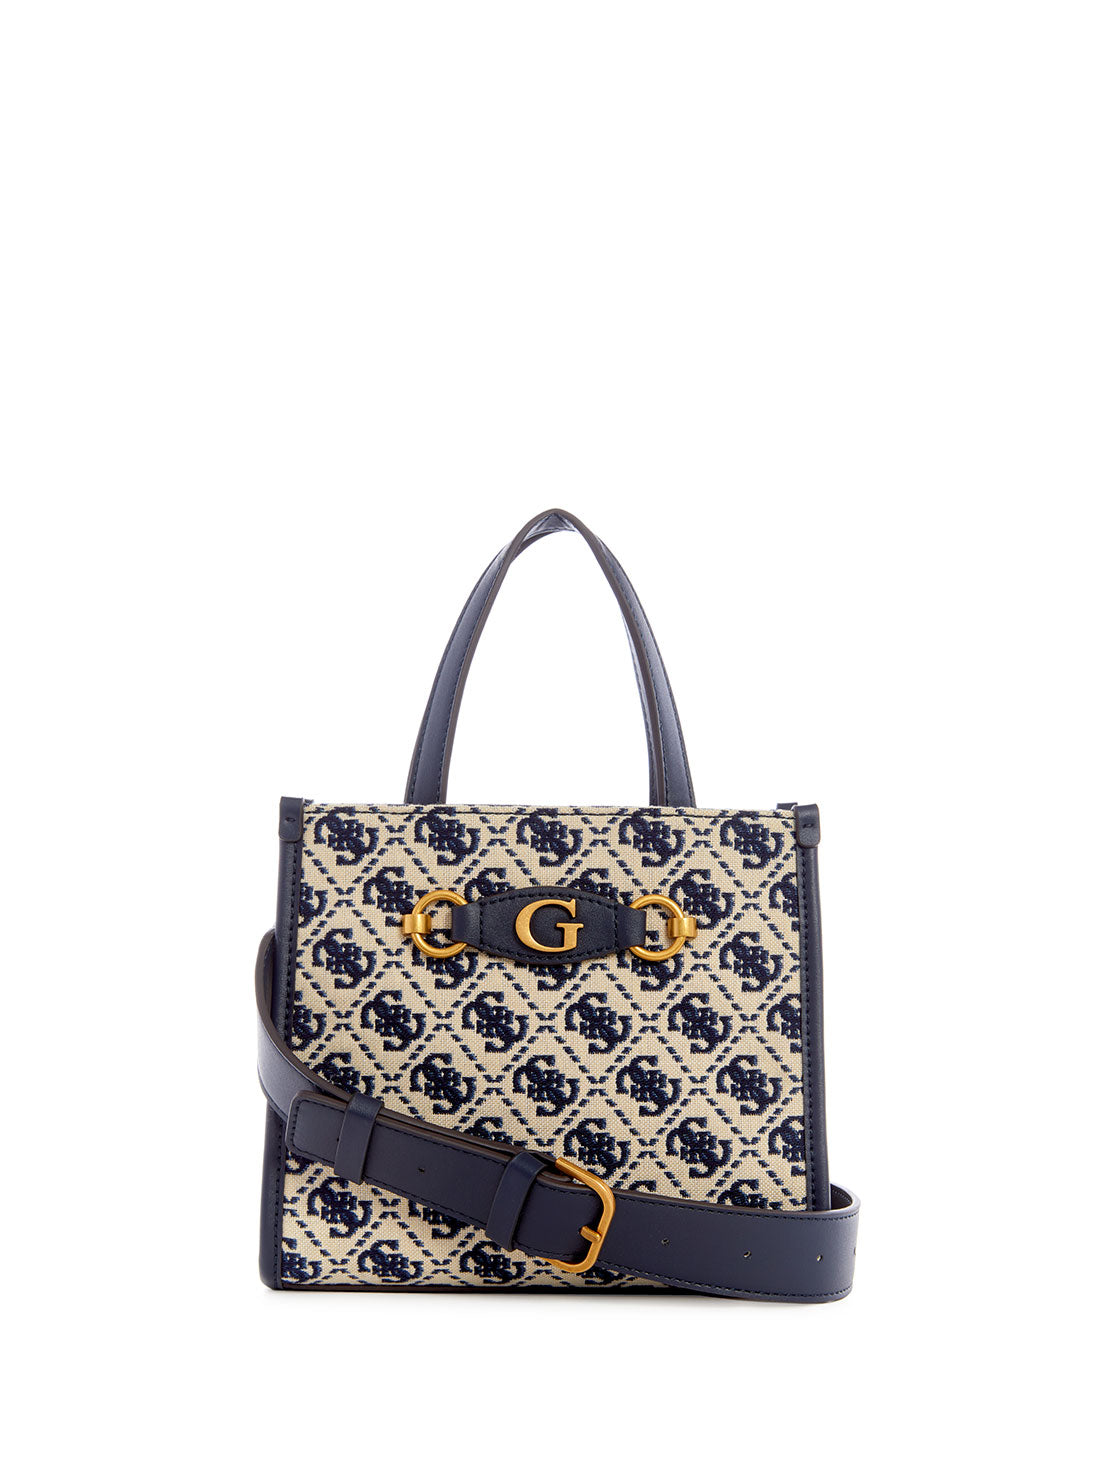 GUESS Women's Navy Logo Izzy Mini Tote Bag JB865476 Front View